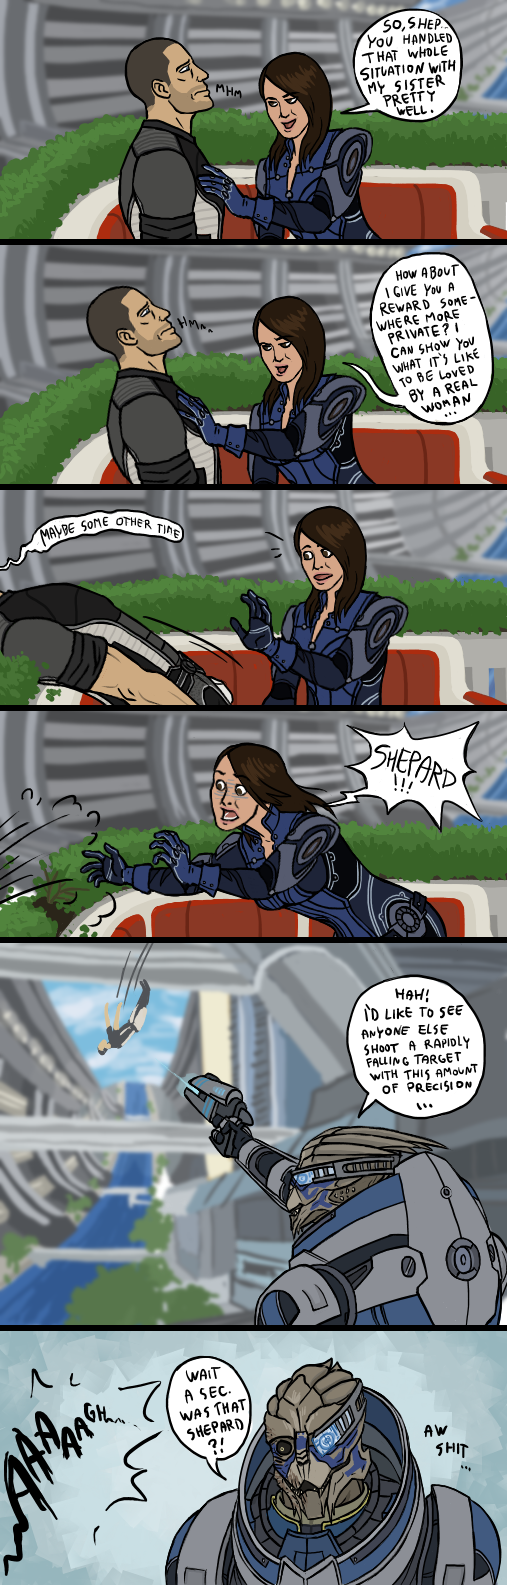 me3__sexually_reluctant_shepard___ashley_by_sparkyhero-d4ukek4.png